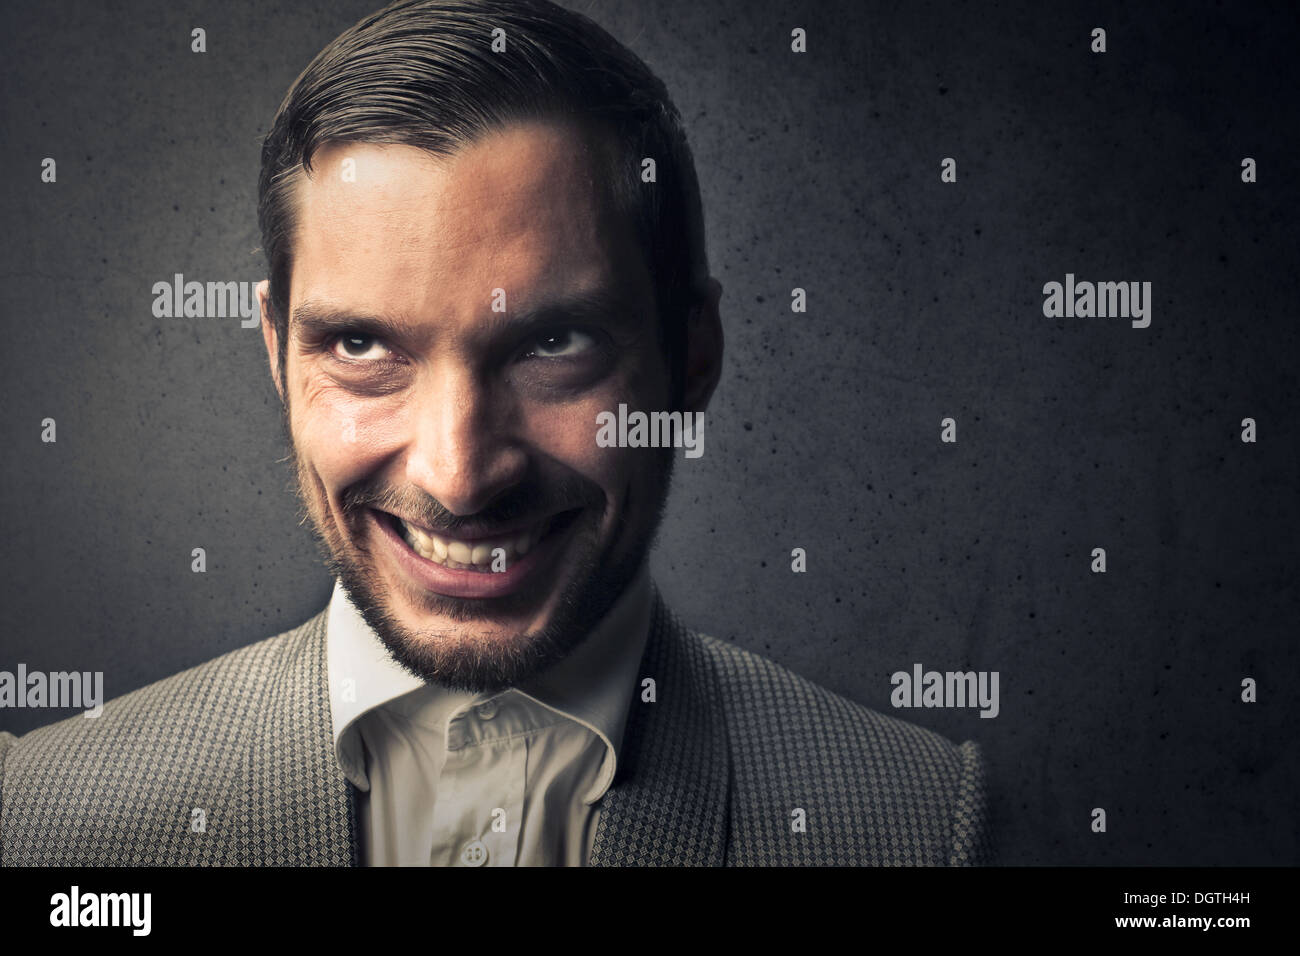 Portrait of an elegant man with a bad smile with a black background Stock Photo